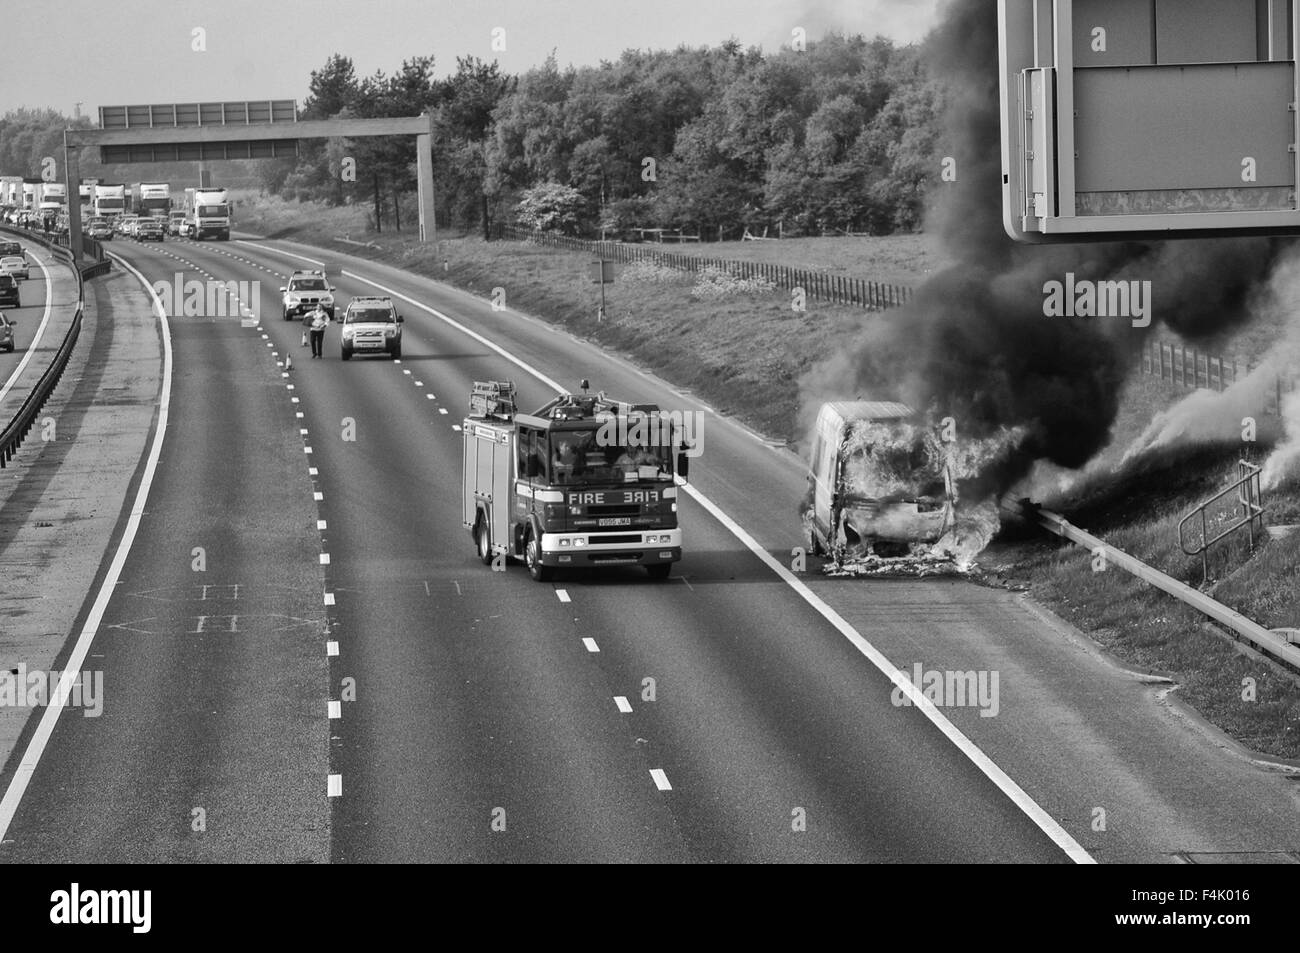 Firemen putting out a van fire on Motorway Stock Photo